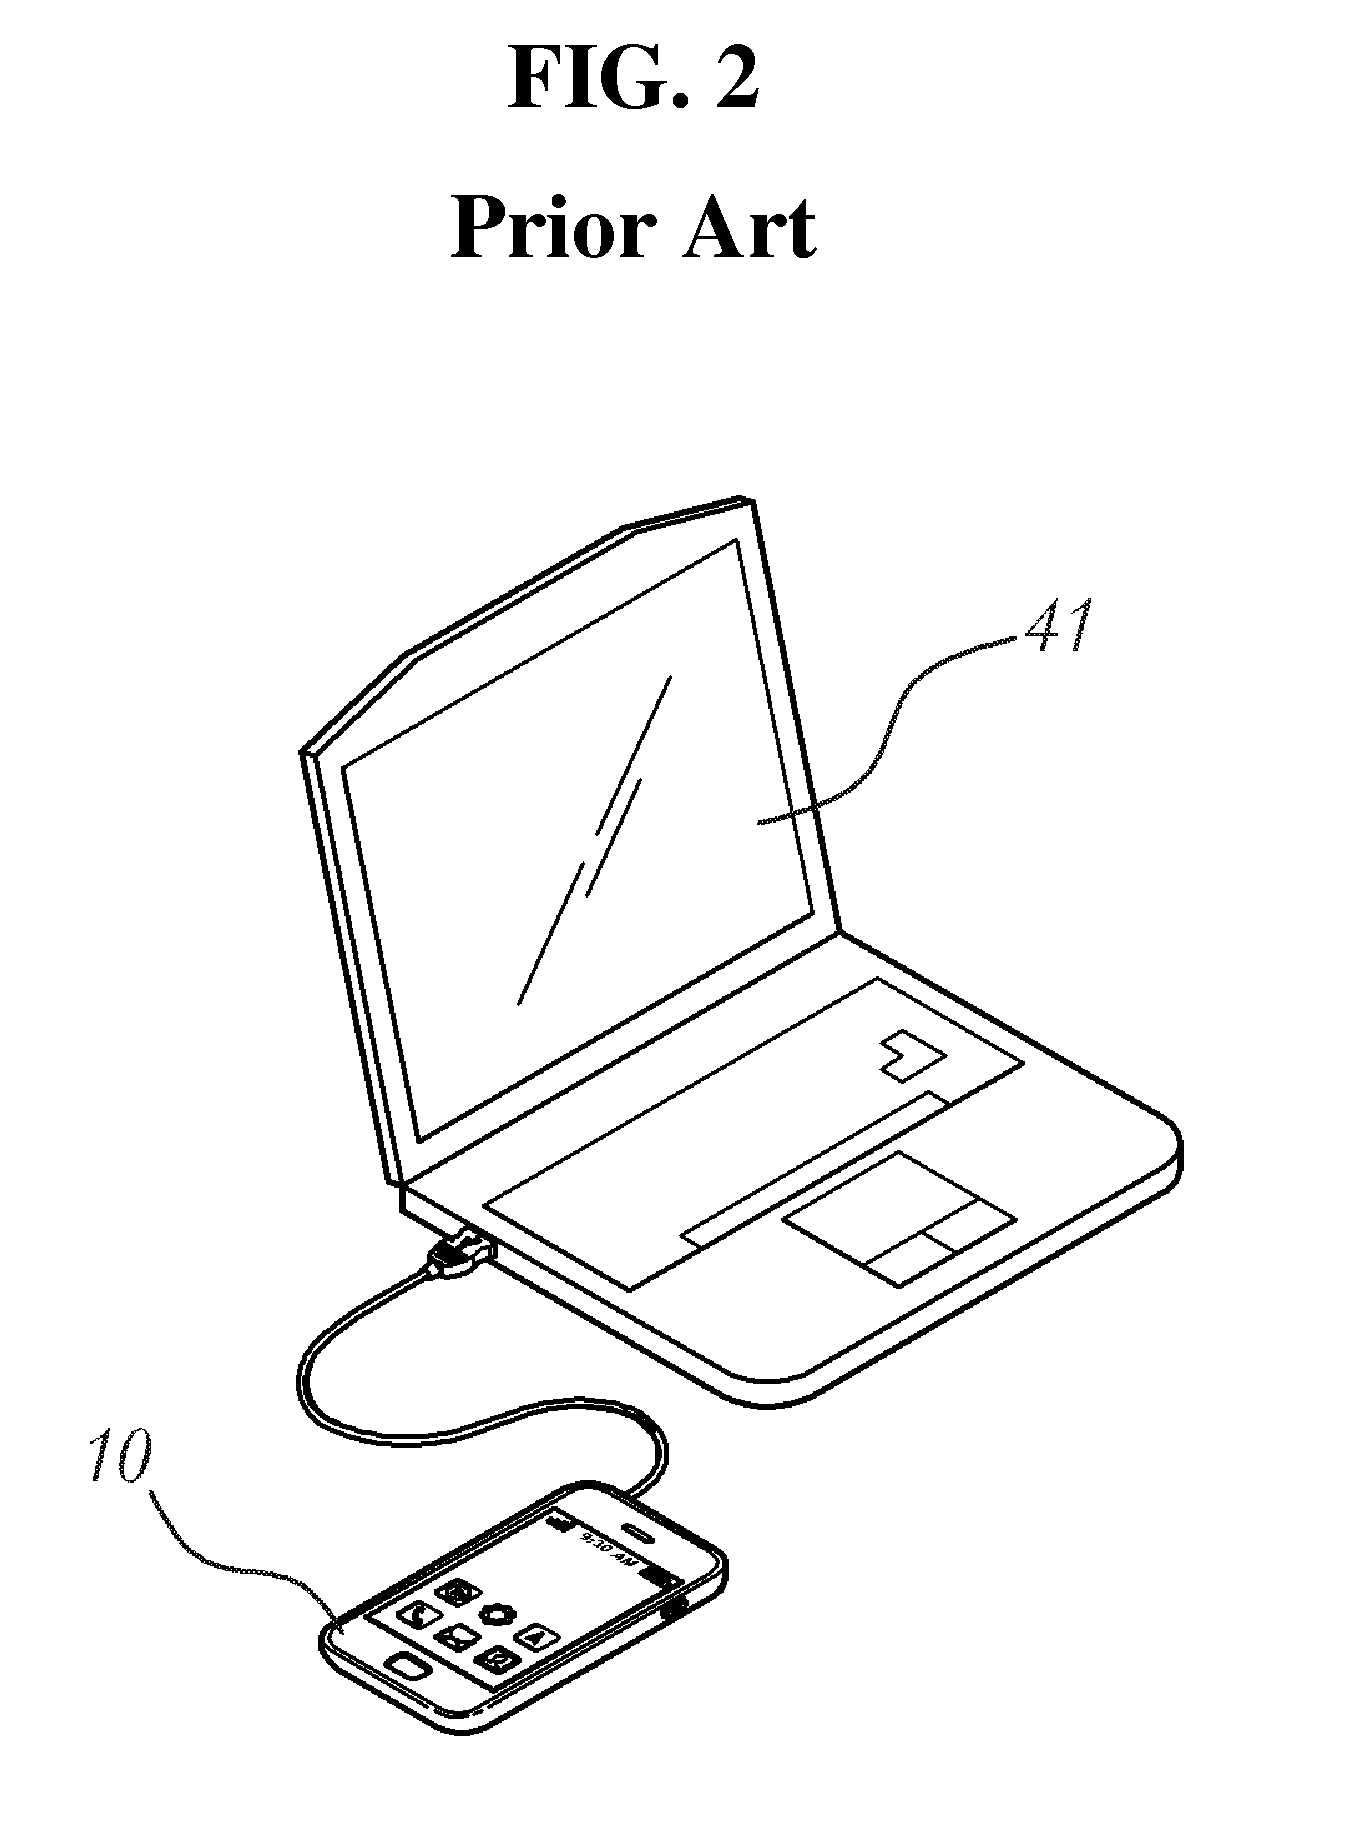 System and method of managing states of computer screen and controlling mobile communication terminal